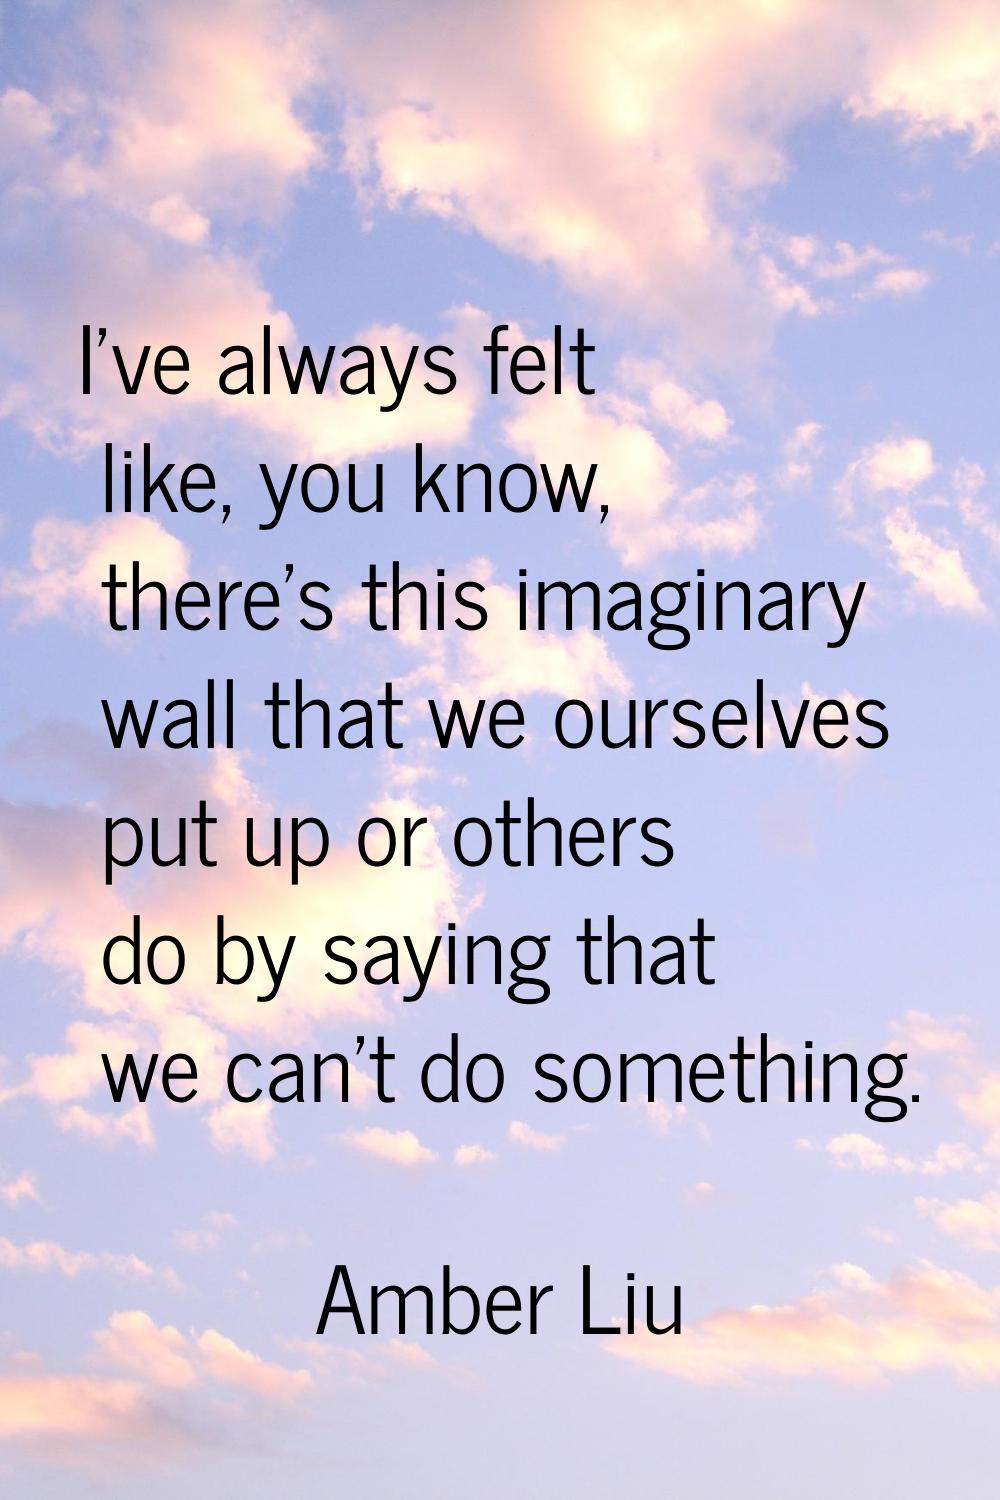 I've always felt like, you know, there's this imaginary wall that we ourselves put up or others do 